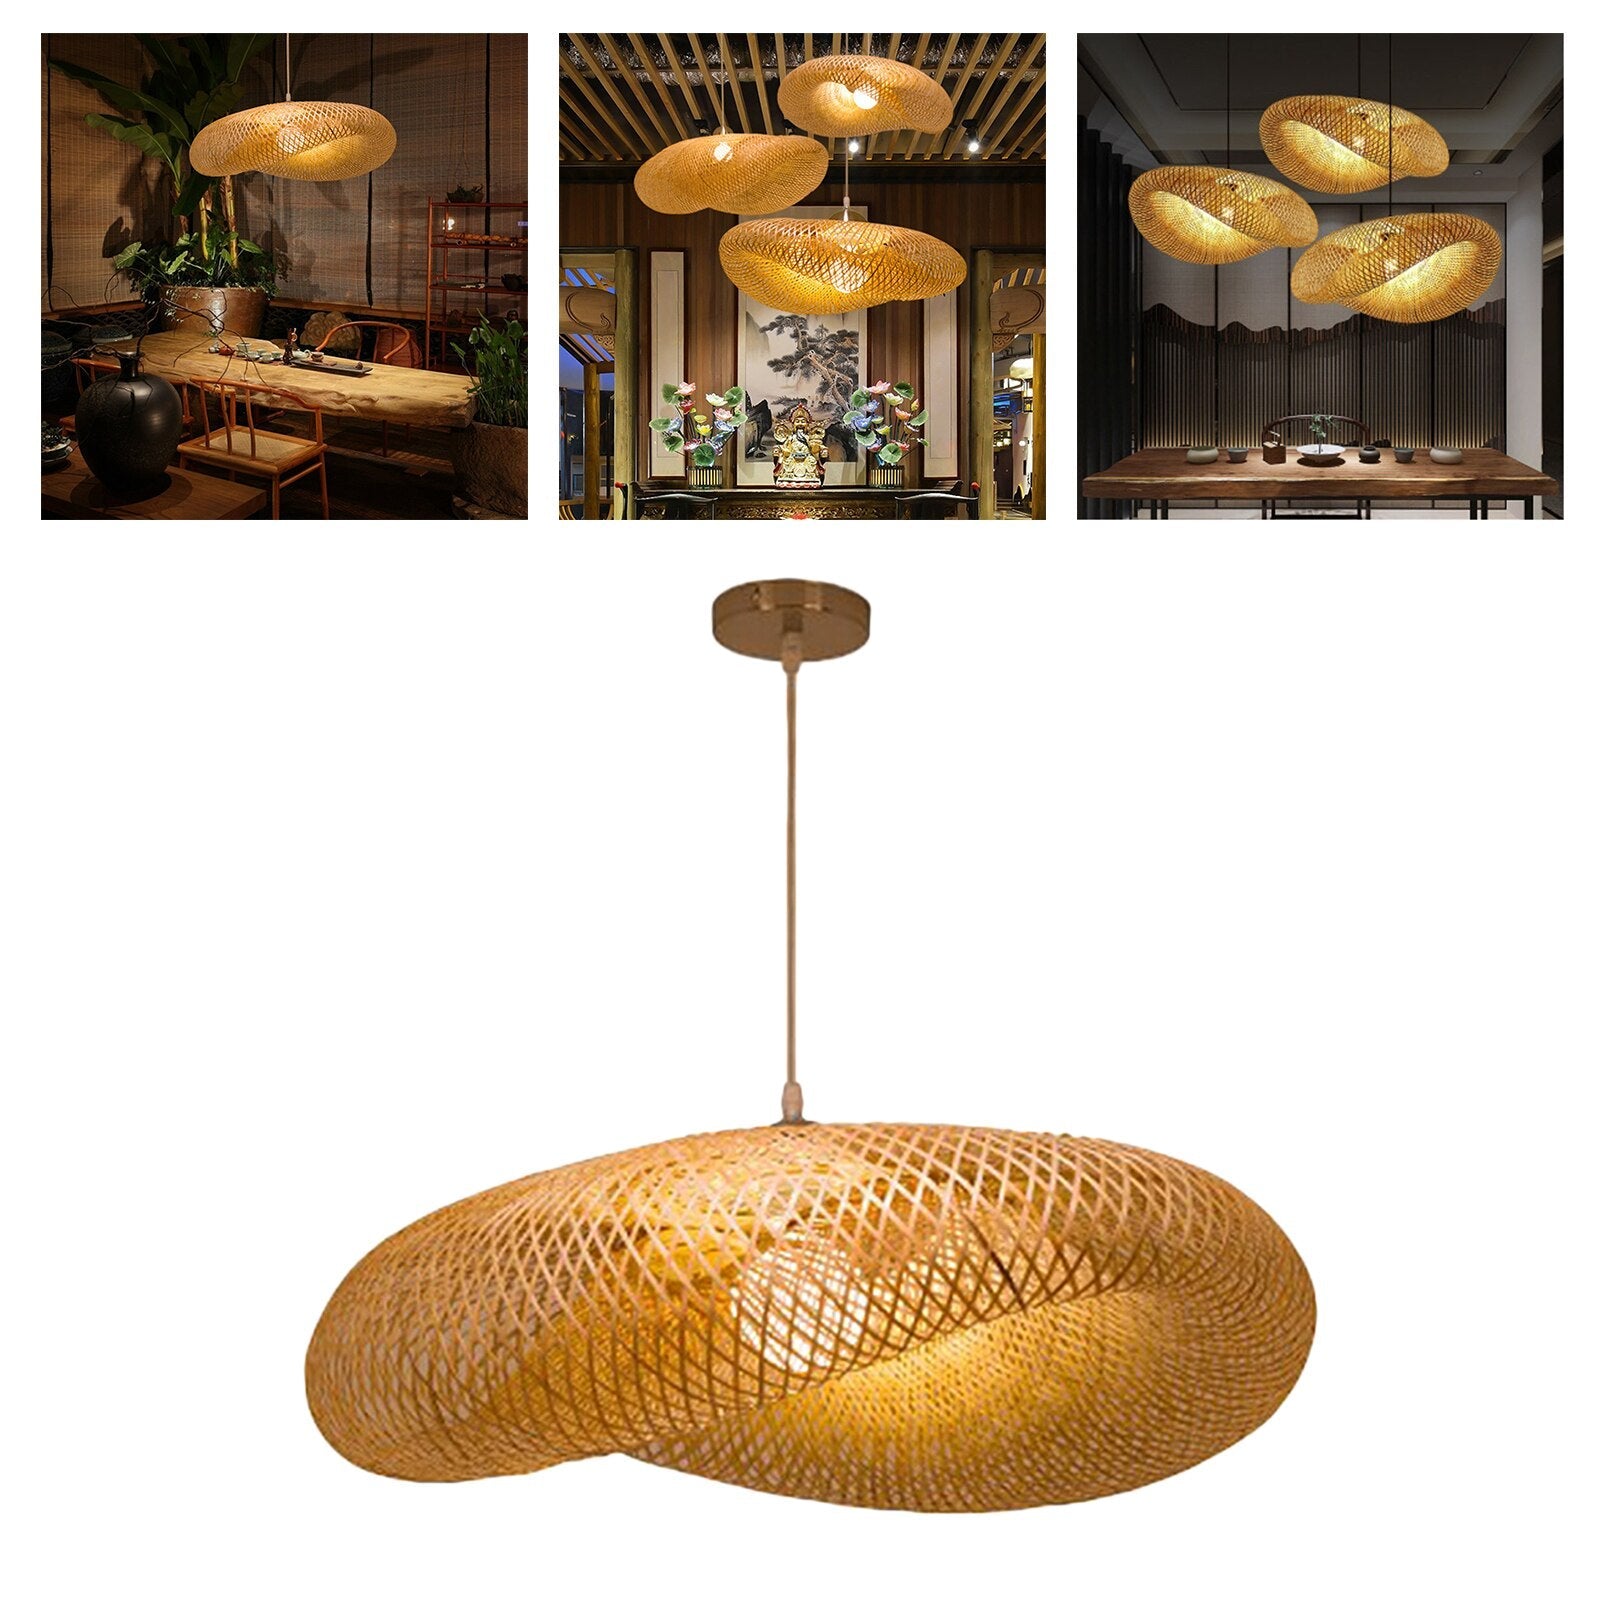 Weaving Chandelier Retro Bamboo Lamp Hanging - Zen Decor - Personal Hour for Yoga and Meditations 